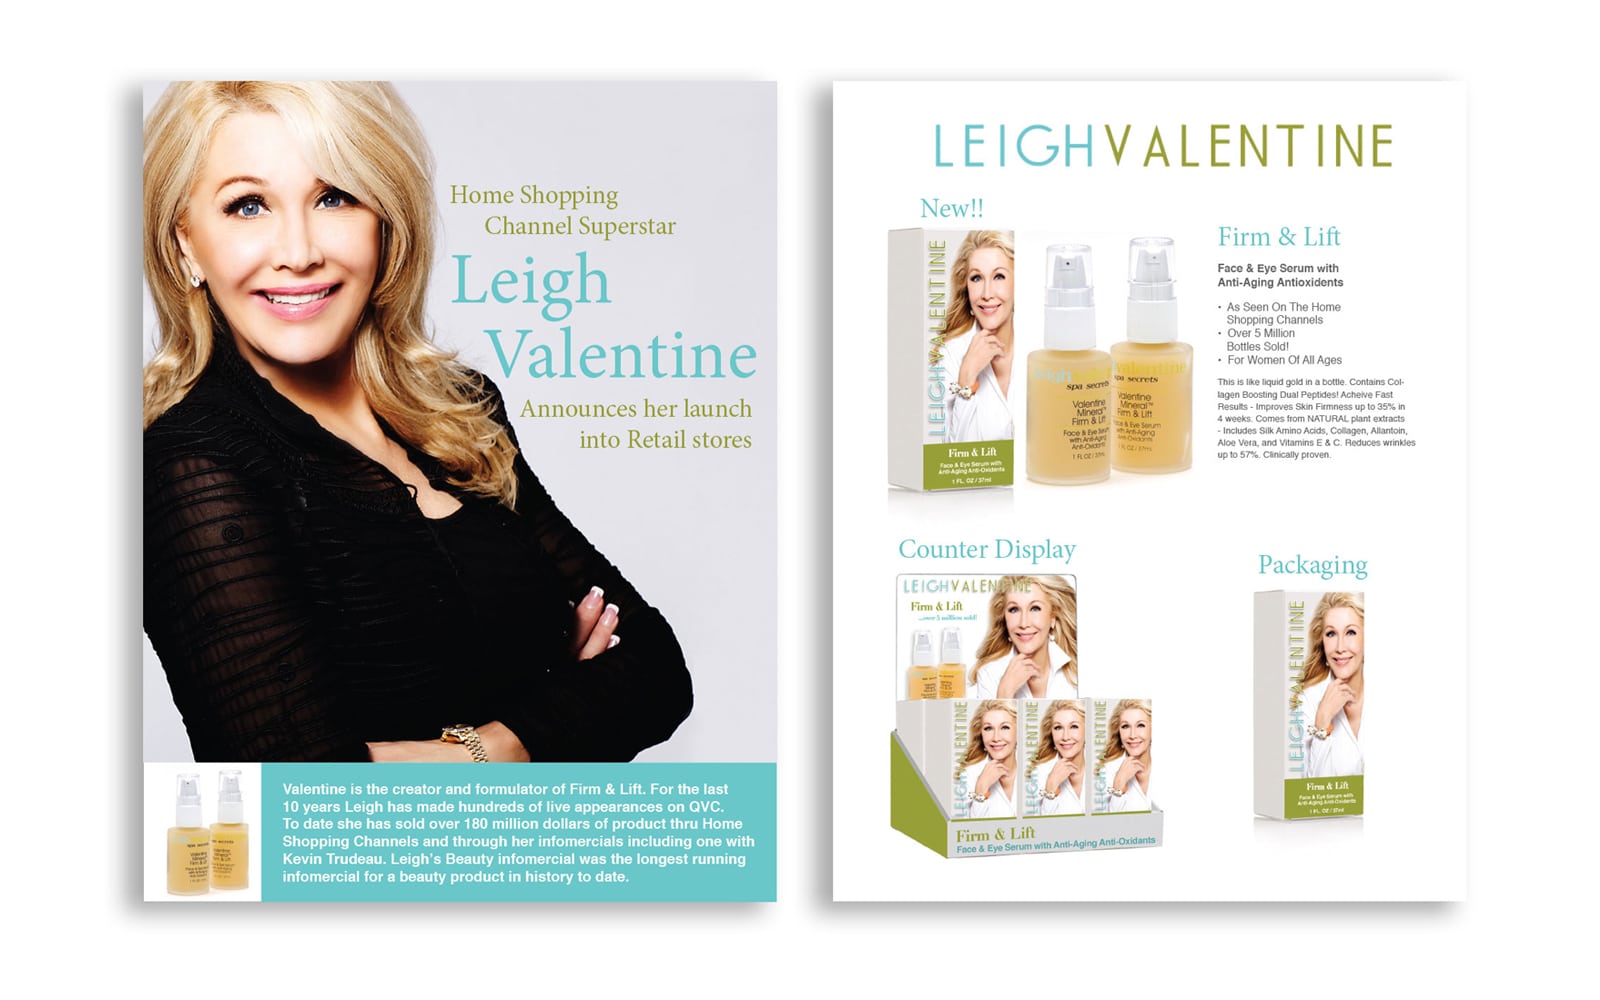 Leigh Valentine brochure including images of counter display, packaging, and the skincare product itself.